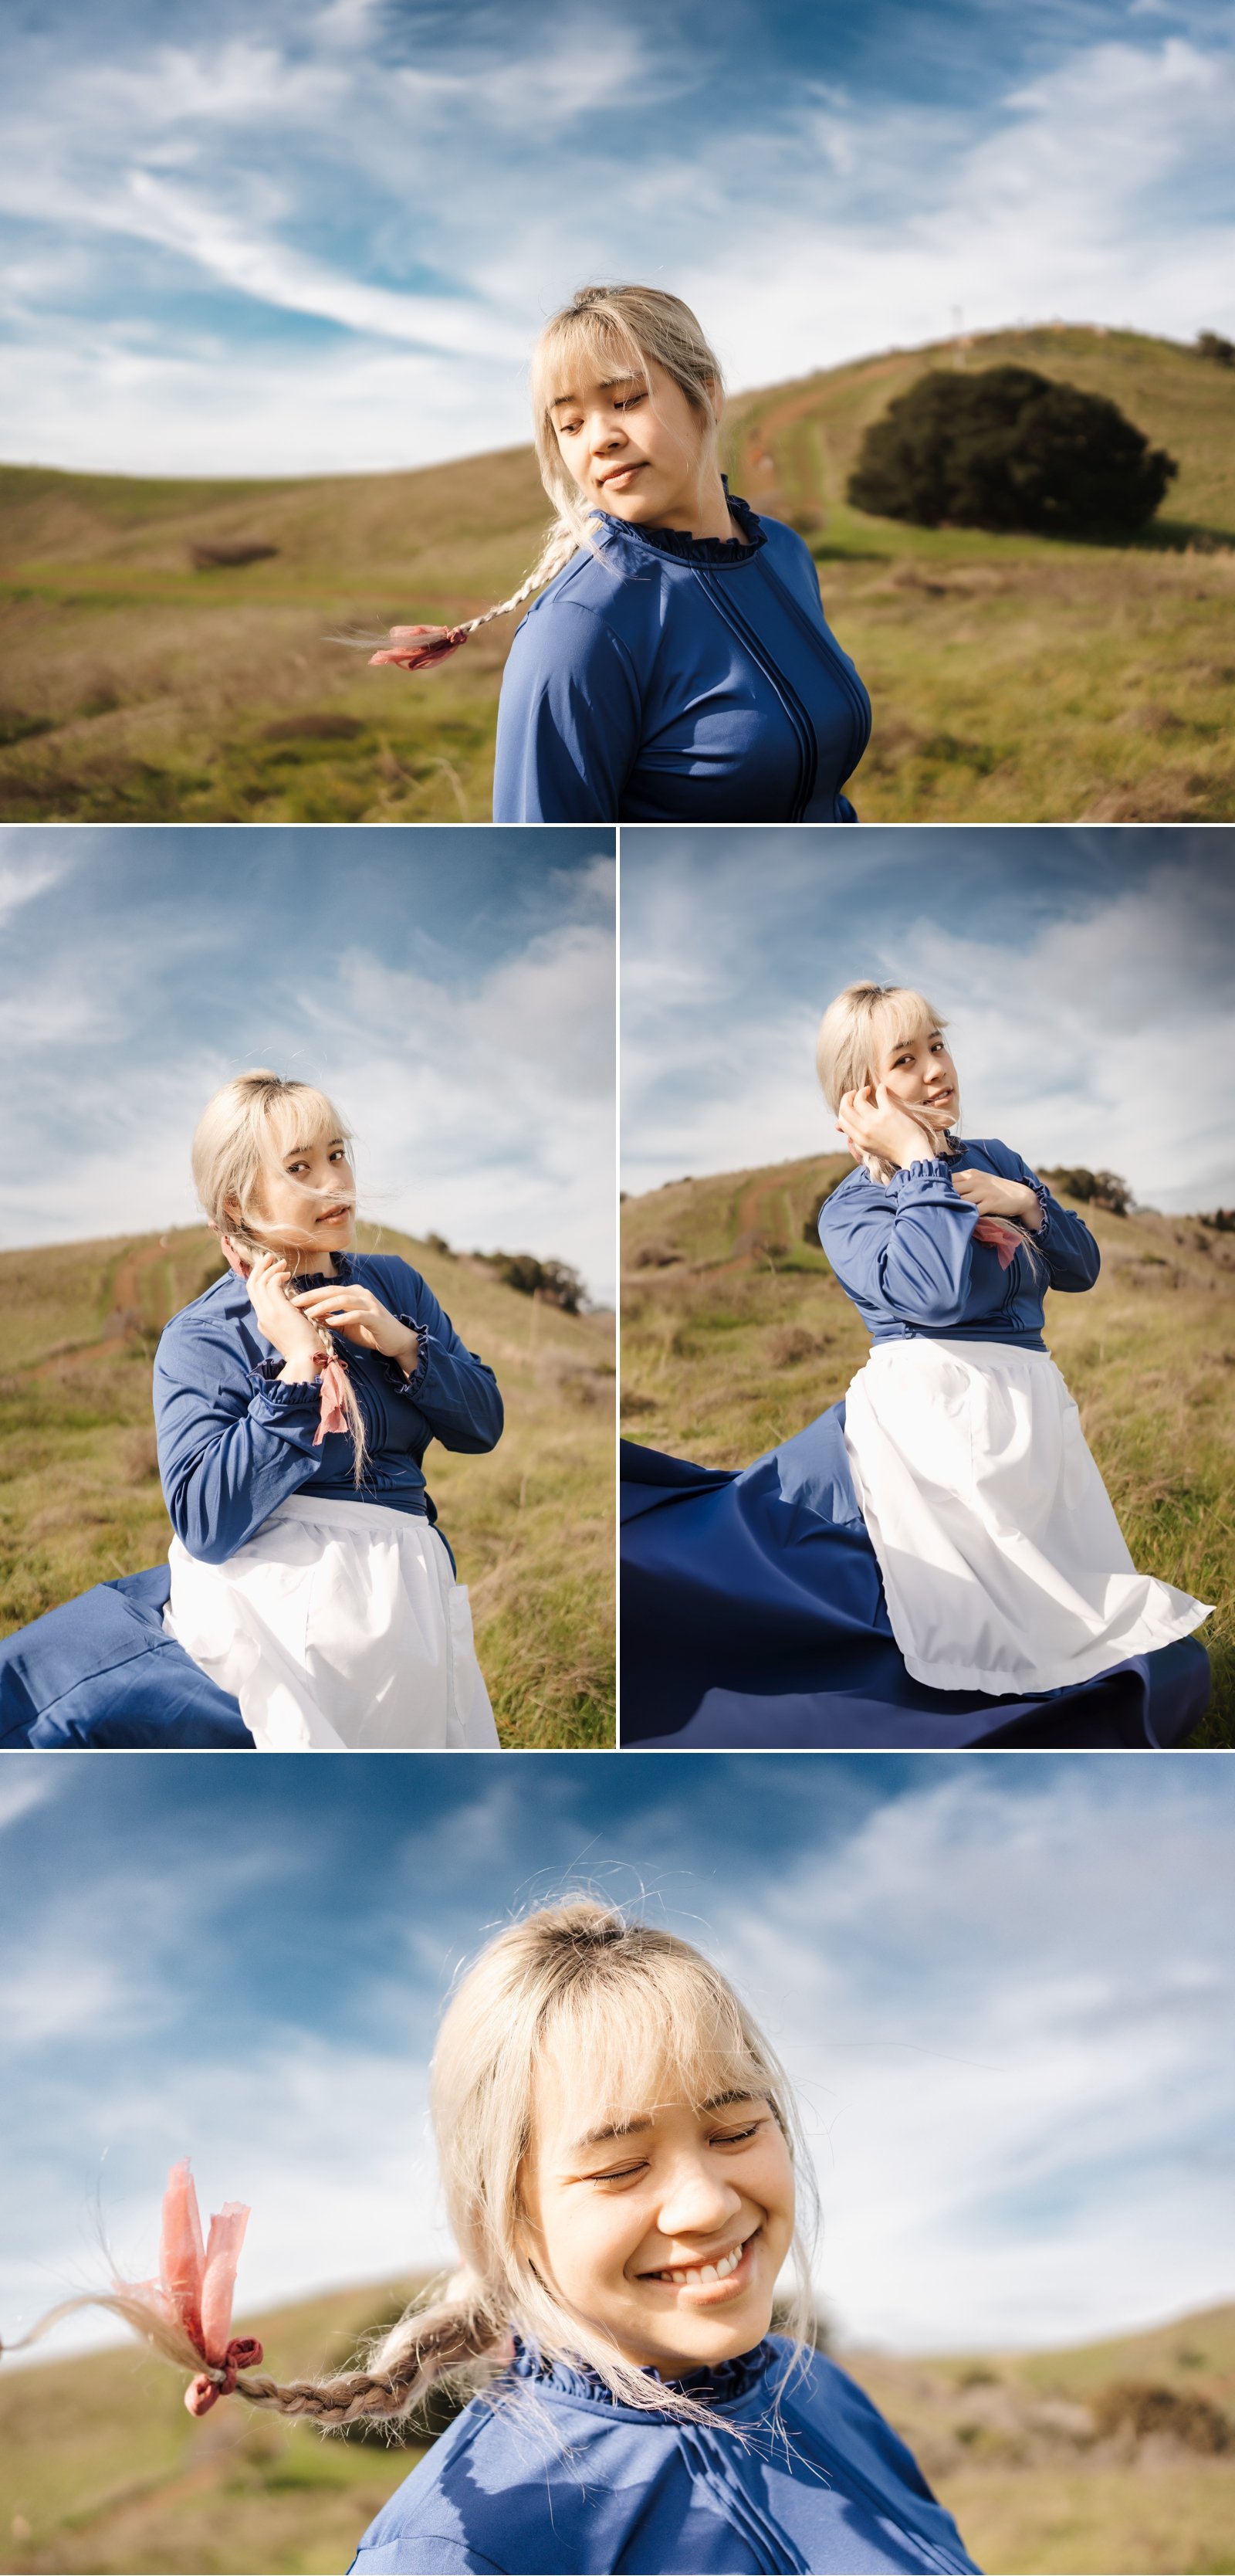 howl's moving castle sophie cosplay photoshoot bay area cosplay photographer 10.jpg